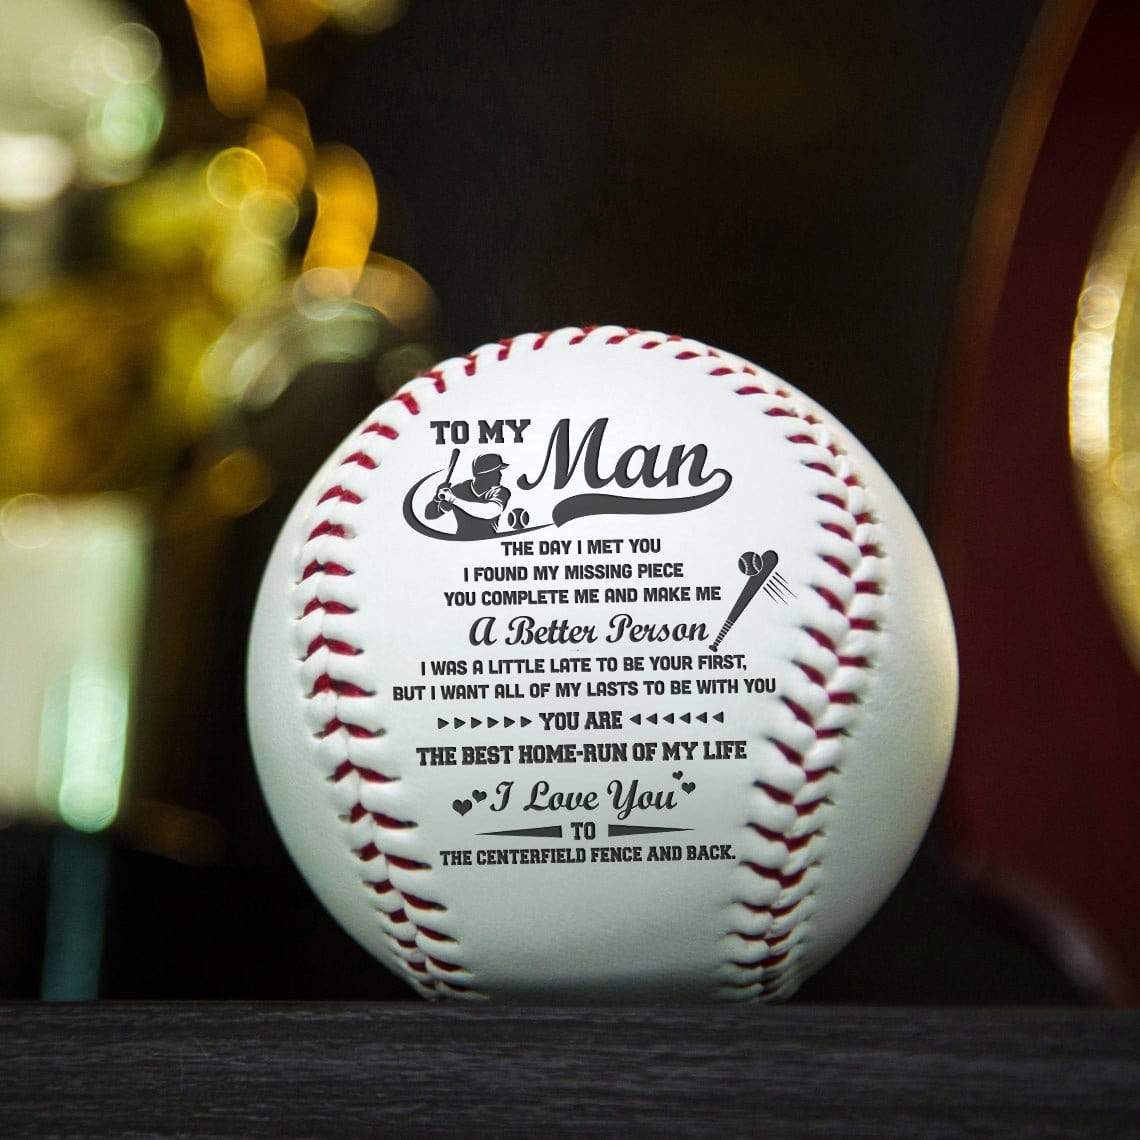 Celebrate your bond with a 'To My Man' baseball decorative piece